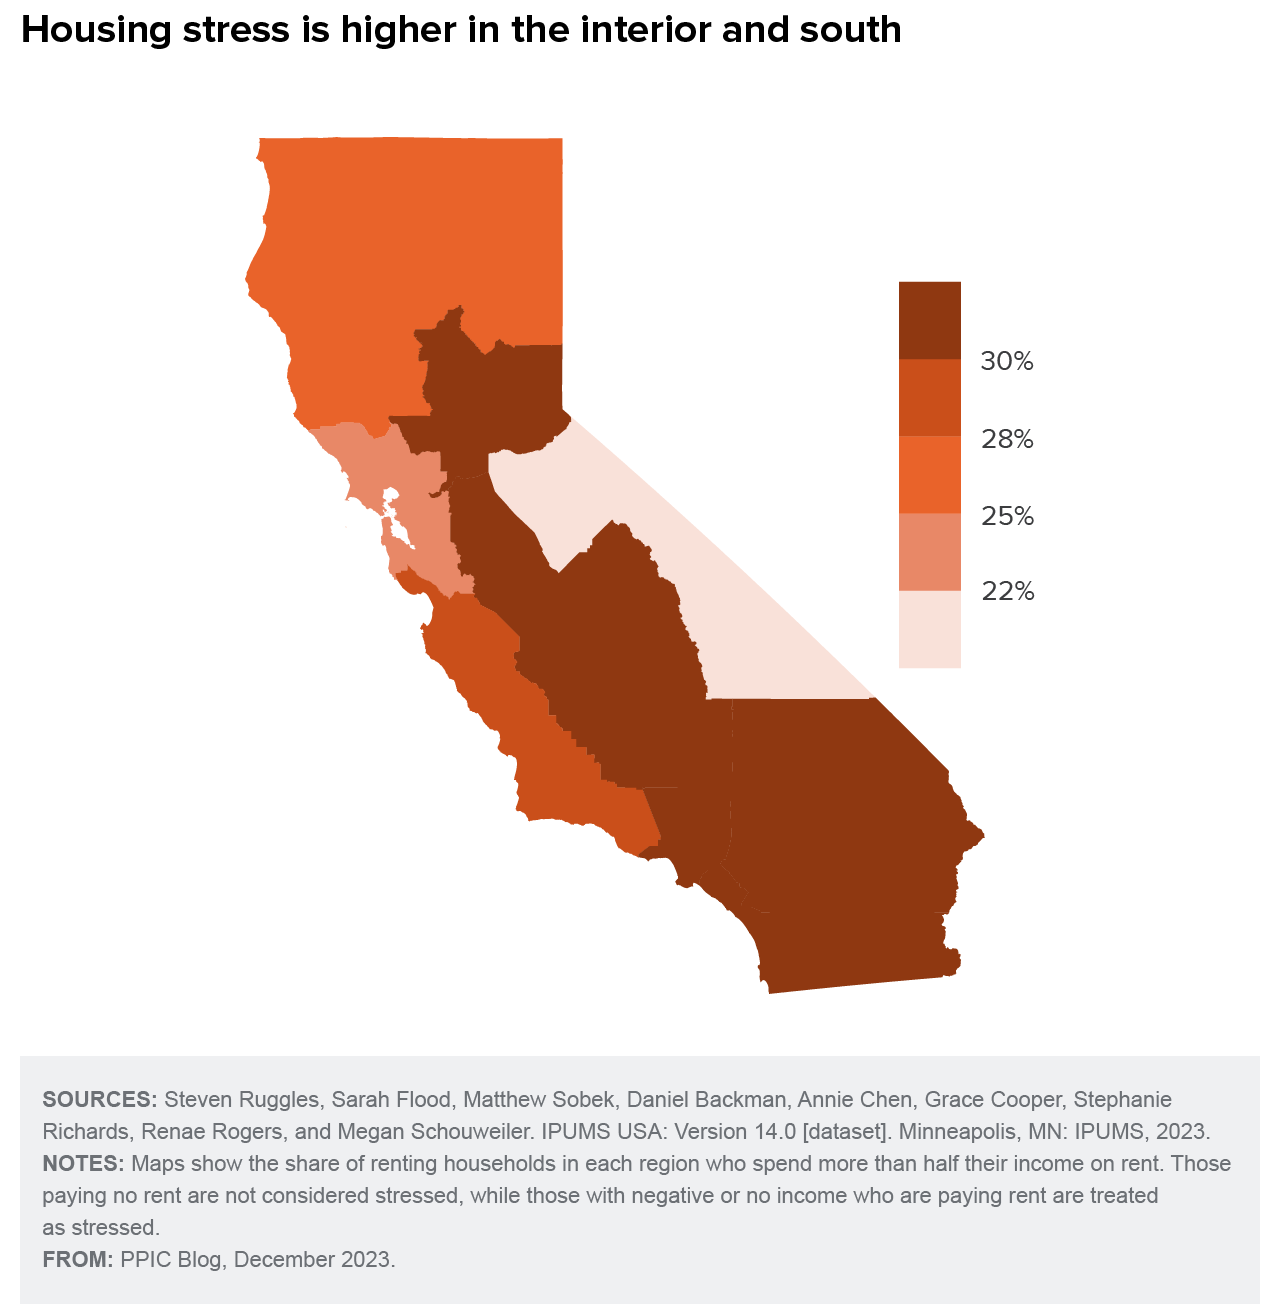 figure - Housing stress is higher in the interior and south